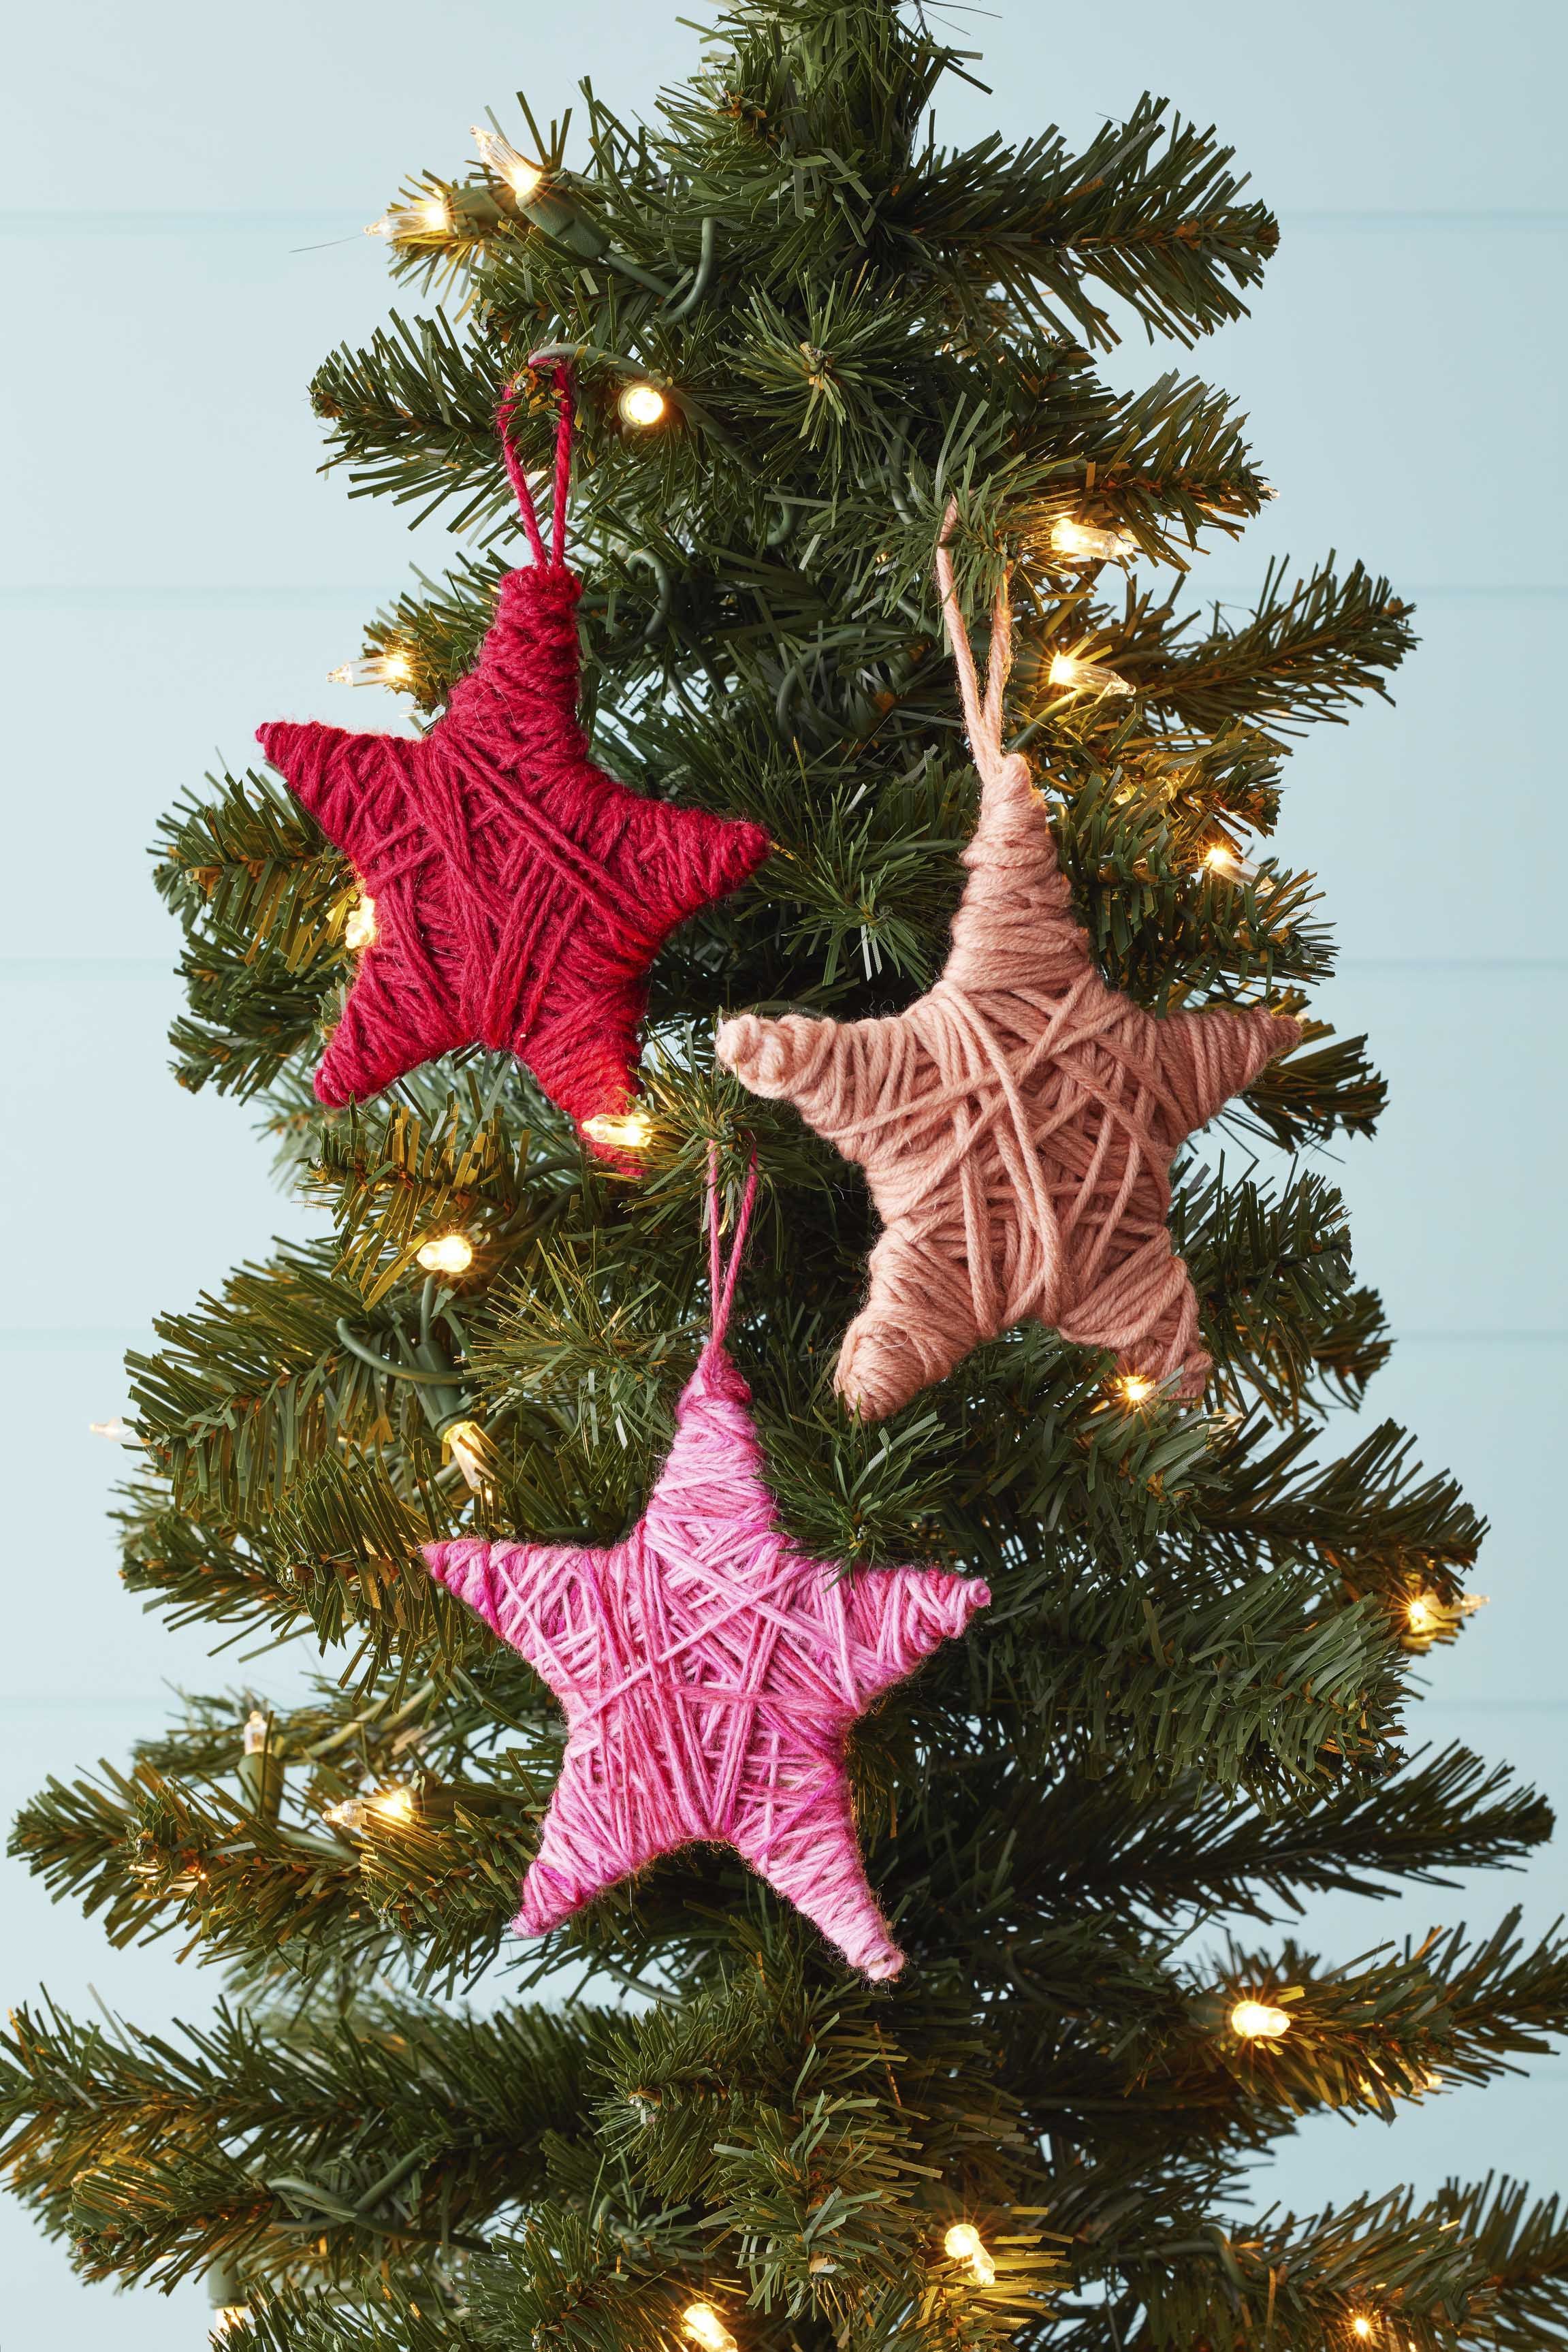 These are the ornaments we really want on our Christmas tree